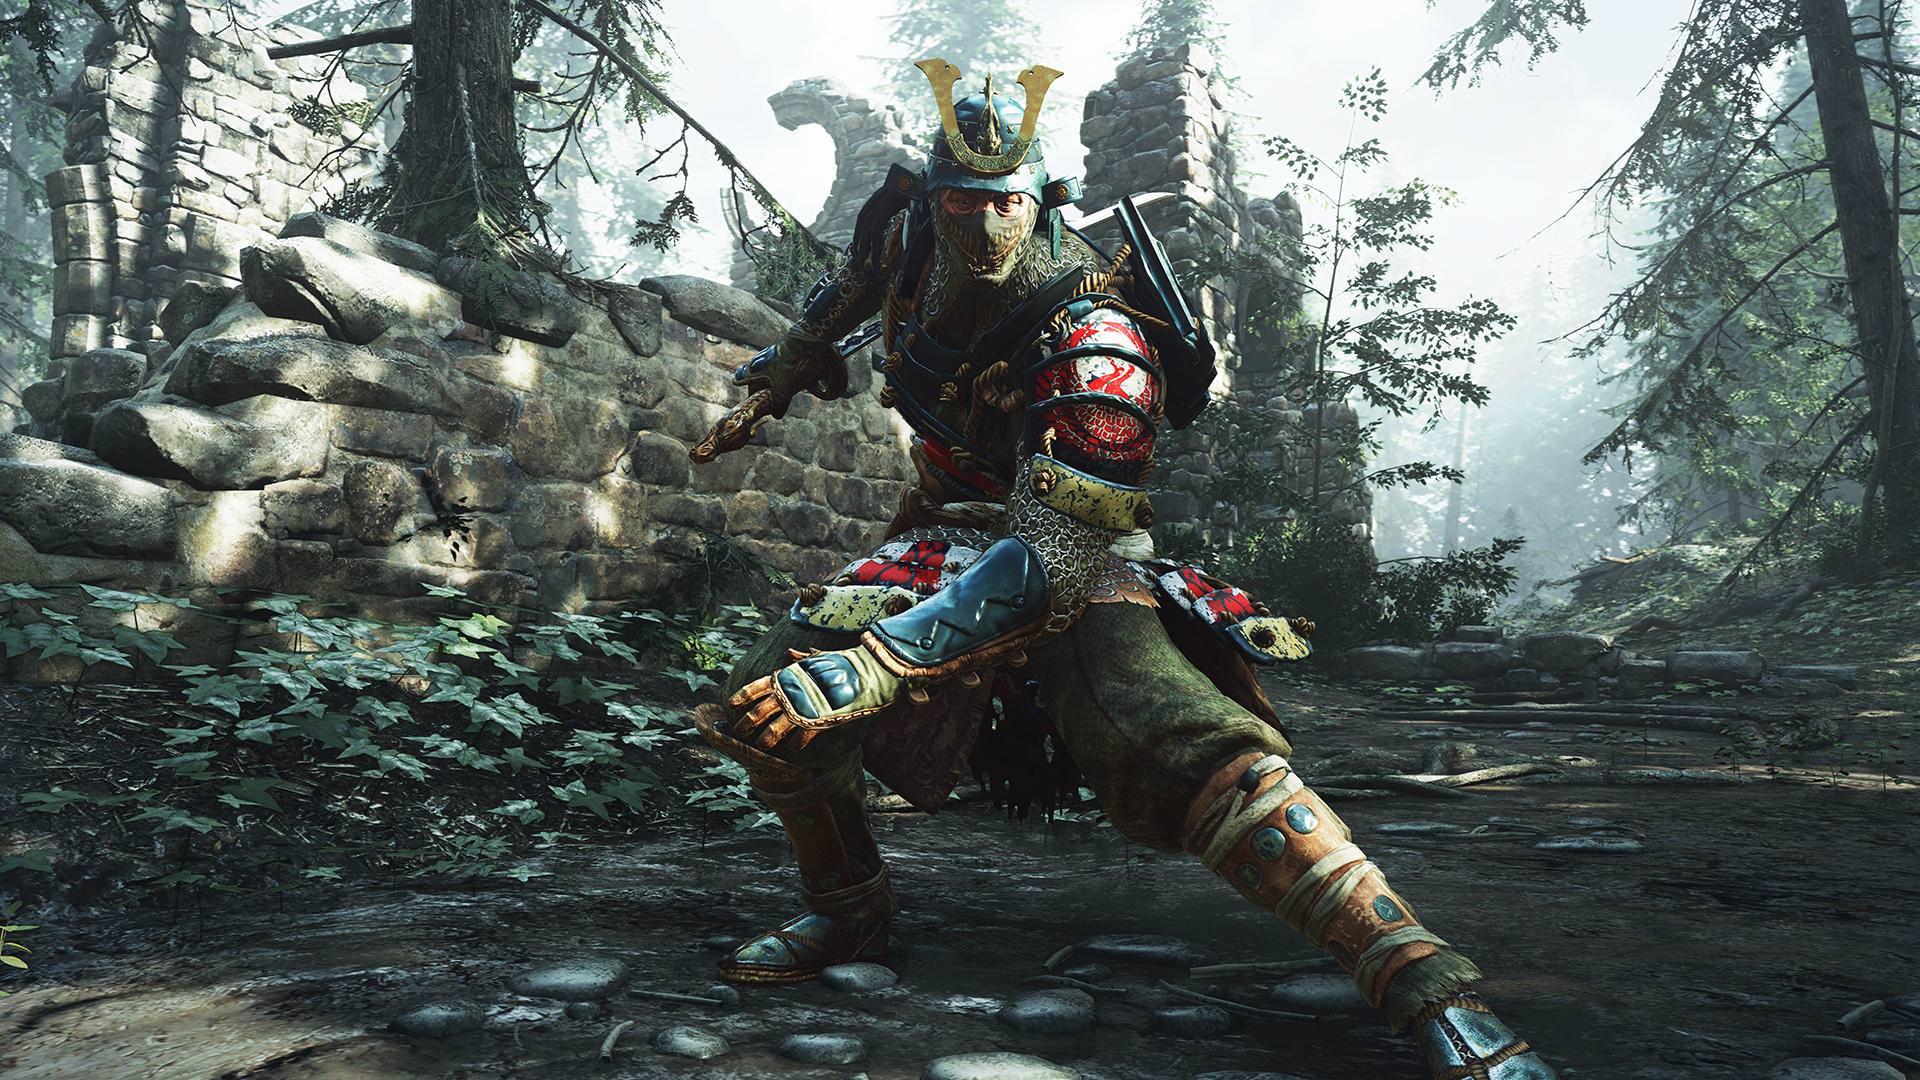 download orochi for honor